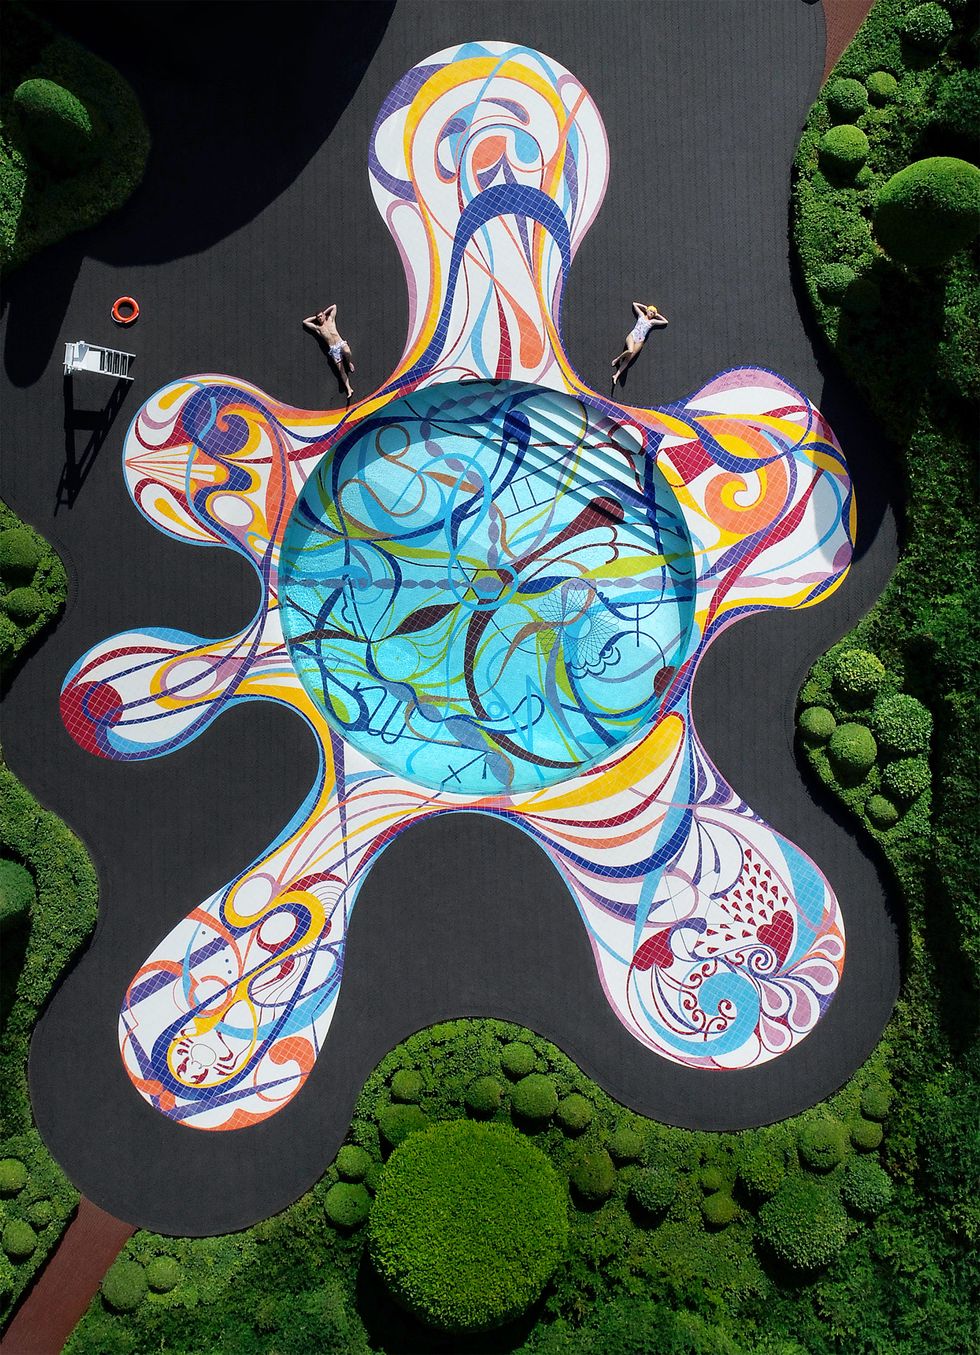 An overhead view of the colorful, curvaceous pool and the amorphous mass extending from it.